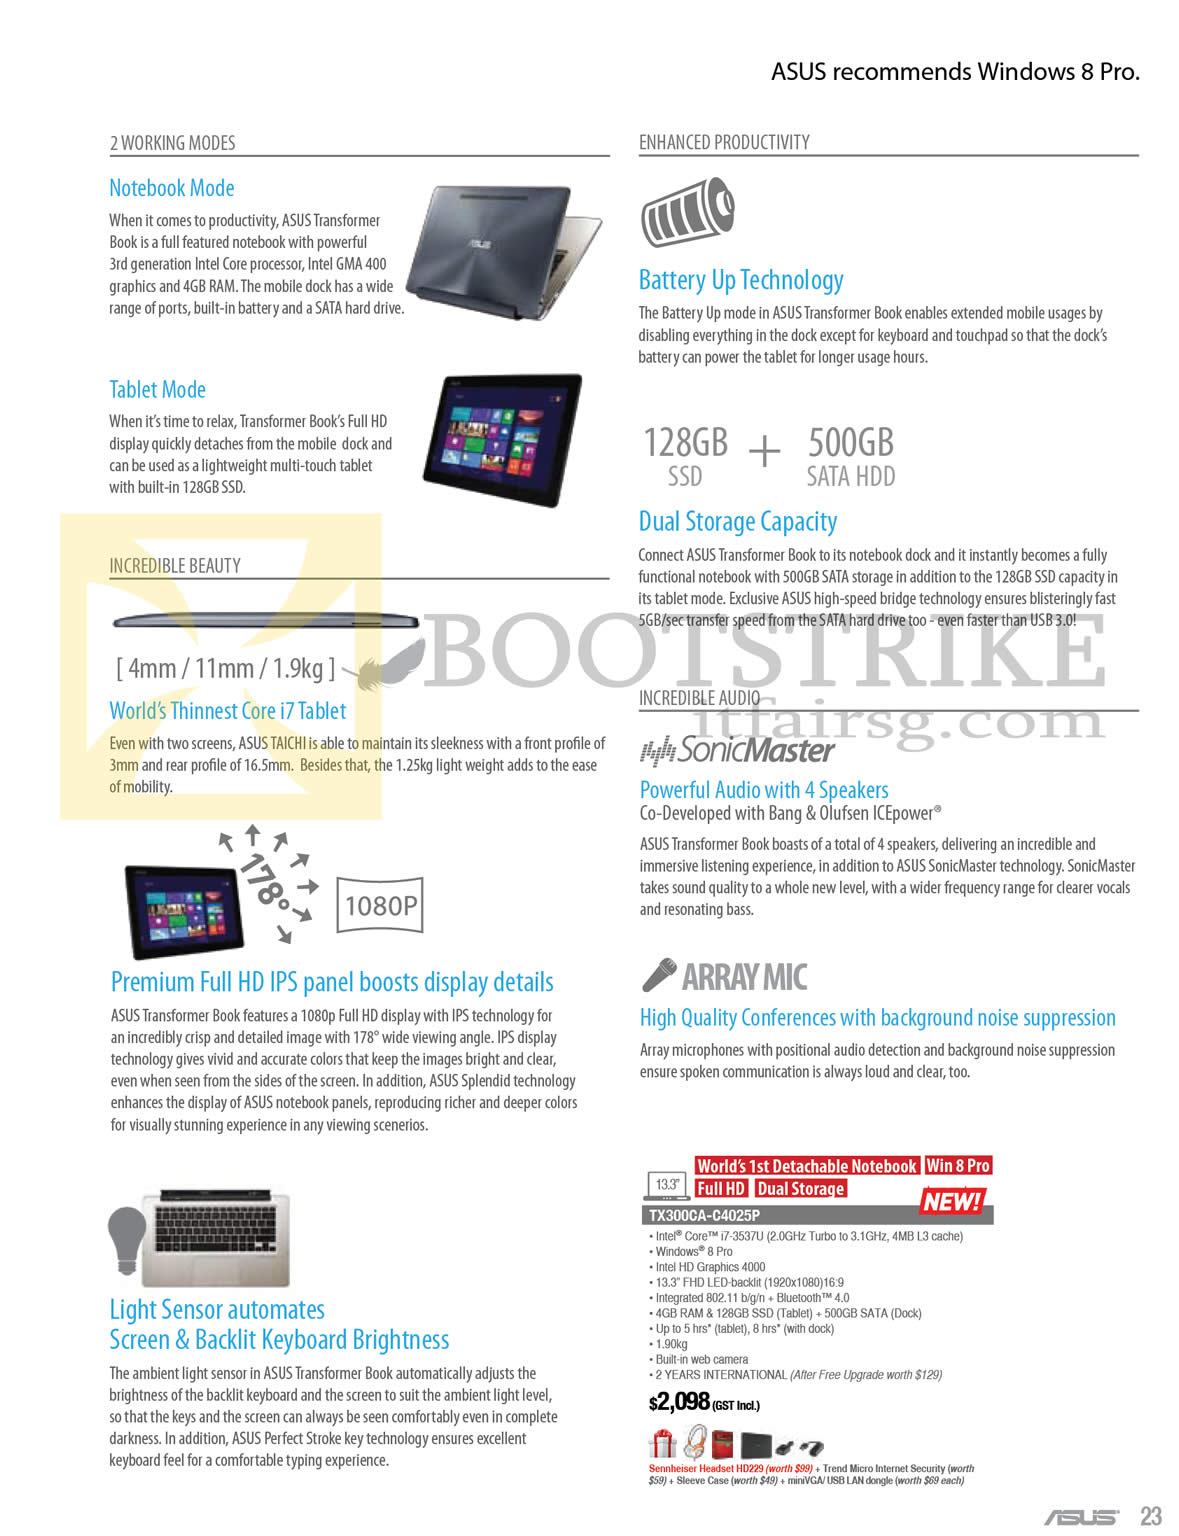 PC SHOW 2013 price list image brochure of ASUS Notebooks Transformer Book Features Working Modes, Beauty, Audio, Battery